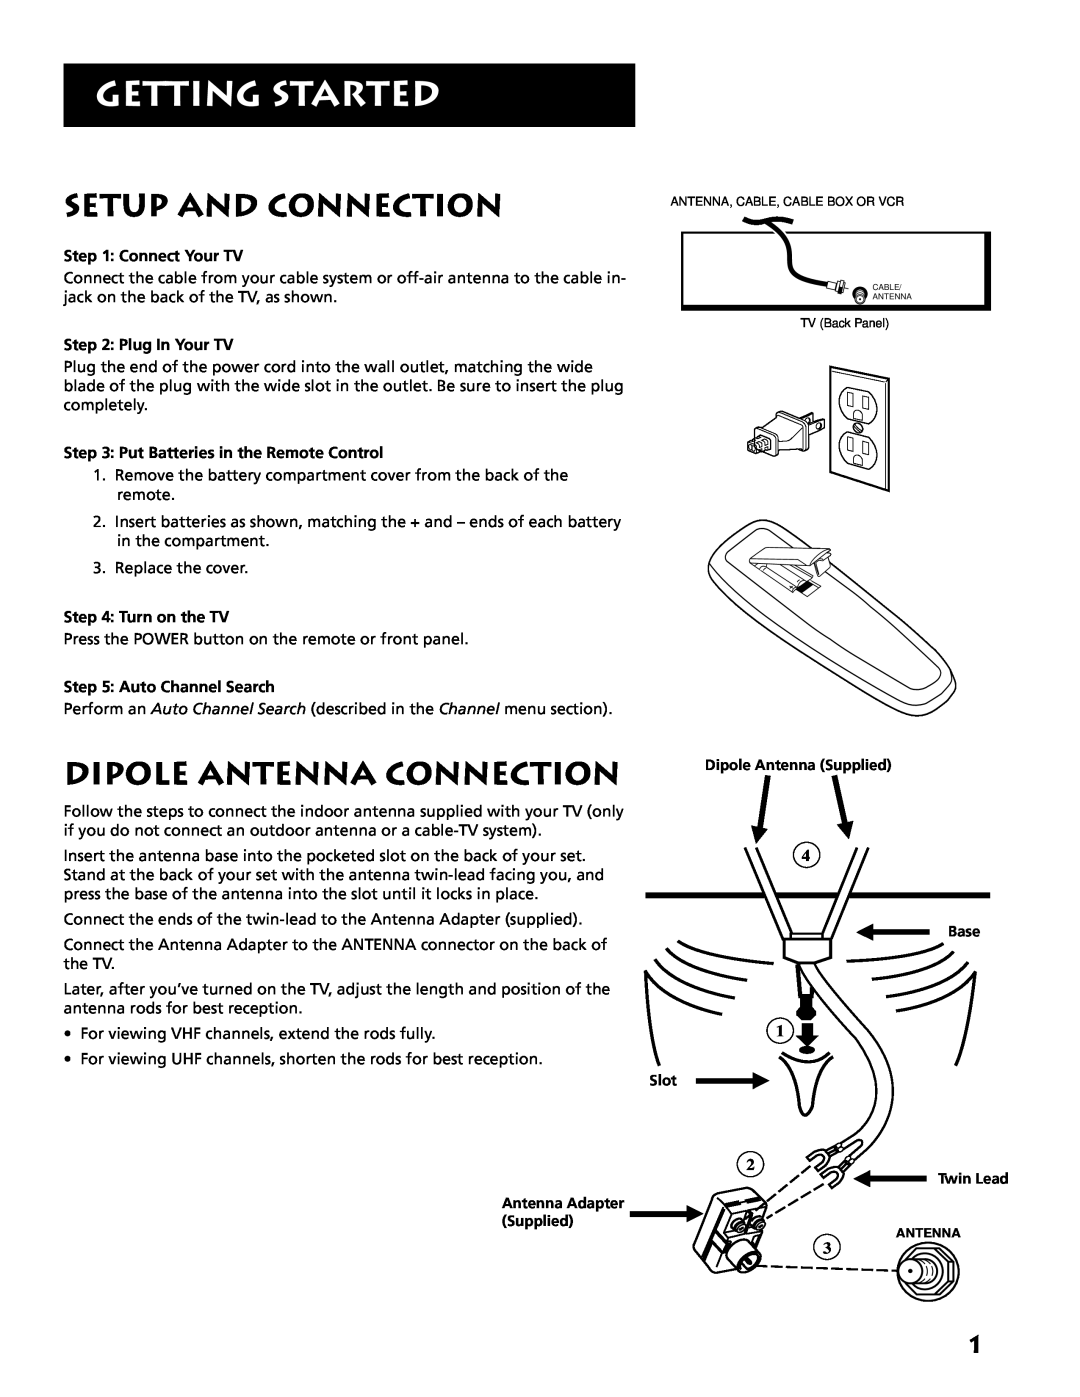 RCA E13319 manual Getting Started, Setup And Connection, Dipole Antenna Connection, Connect Your TV, Plug In Your TV 